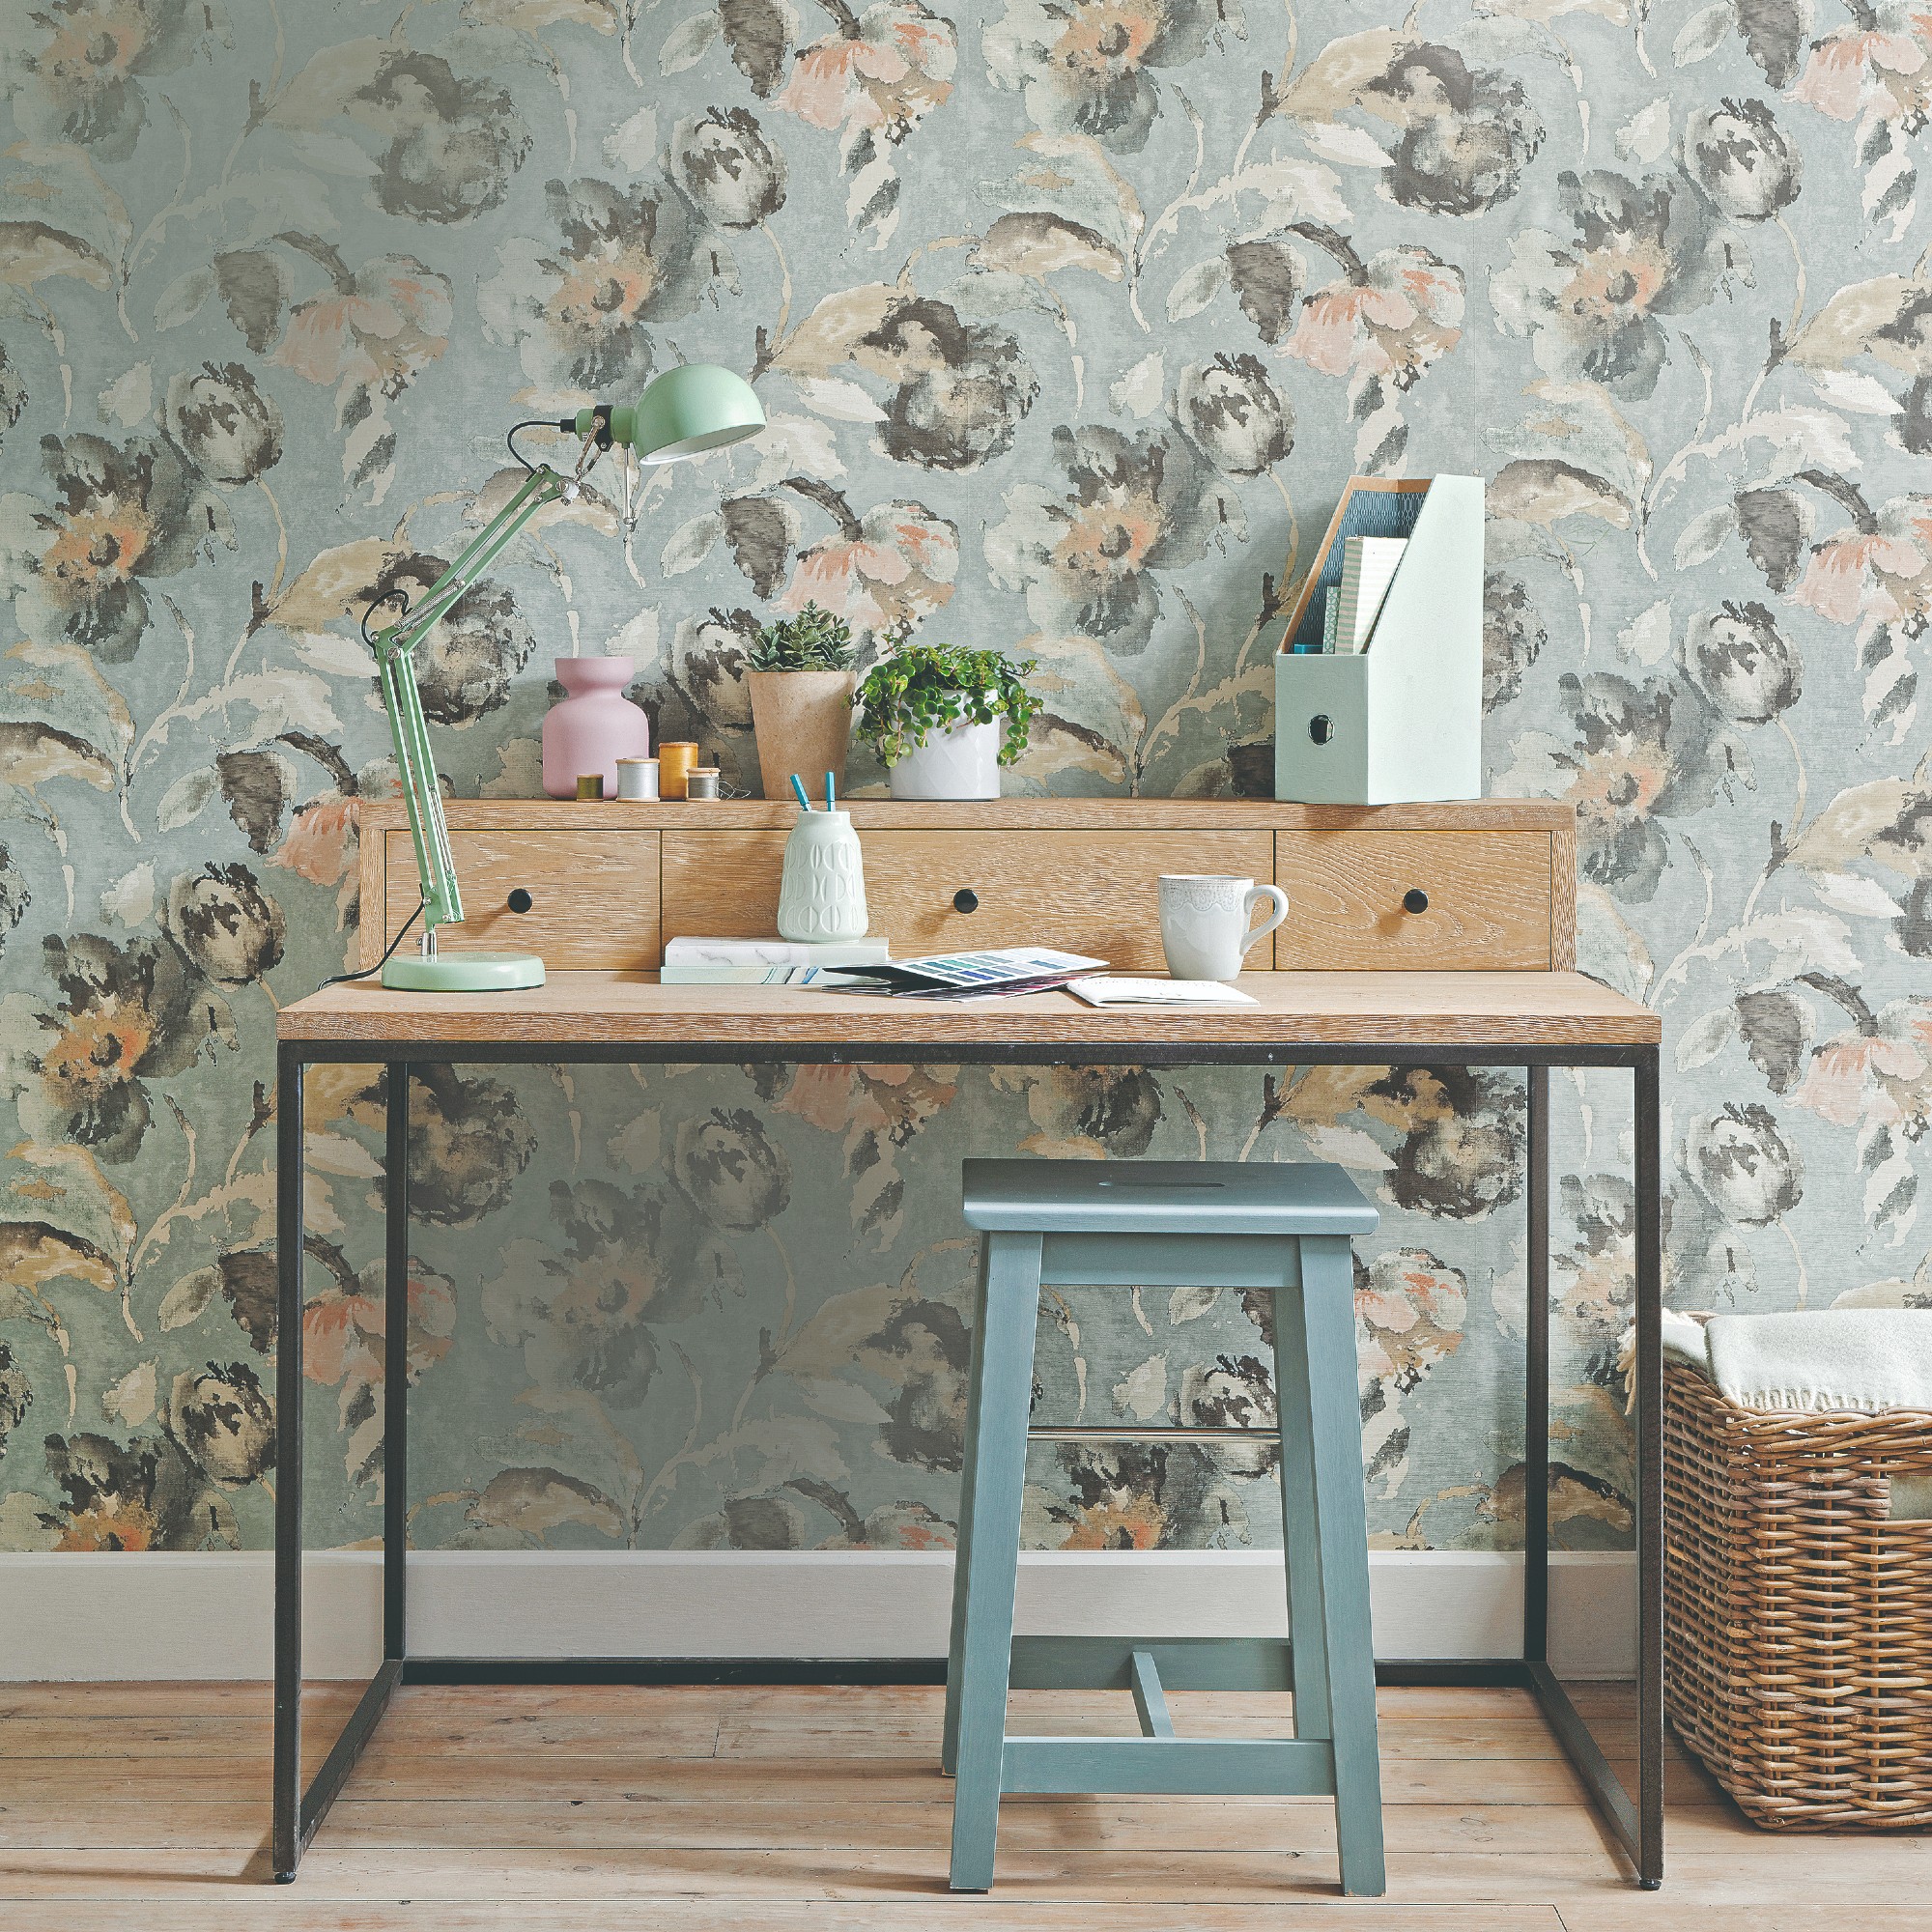 A home office set up with a desk, stool and a floral wallpaper